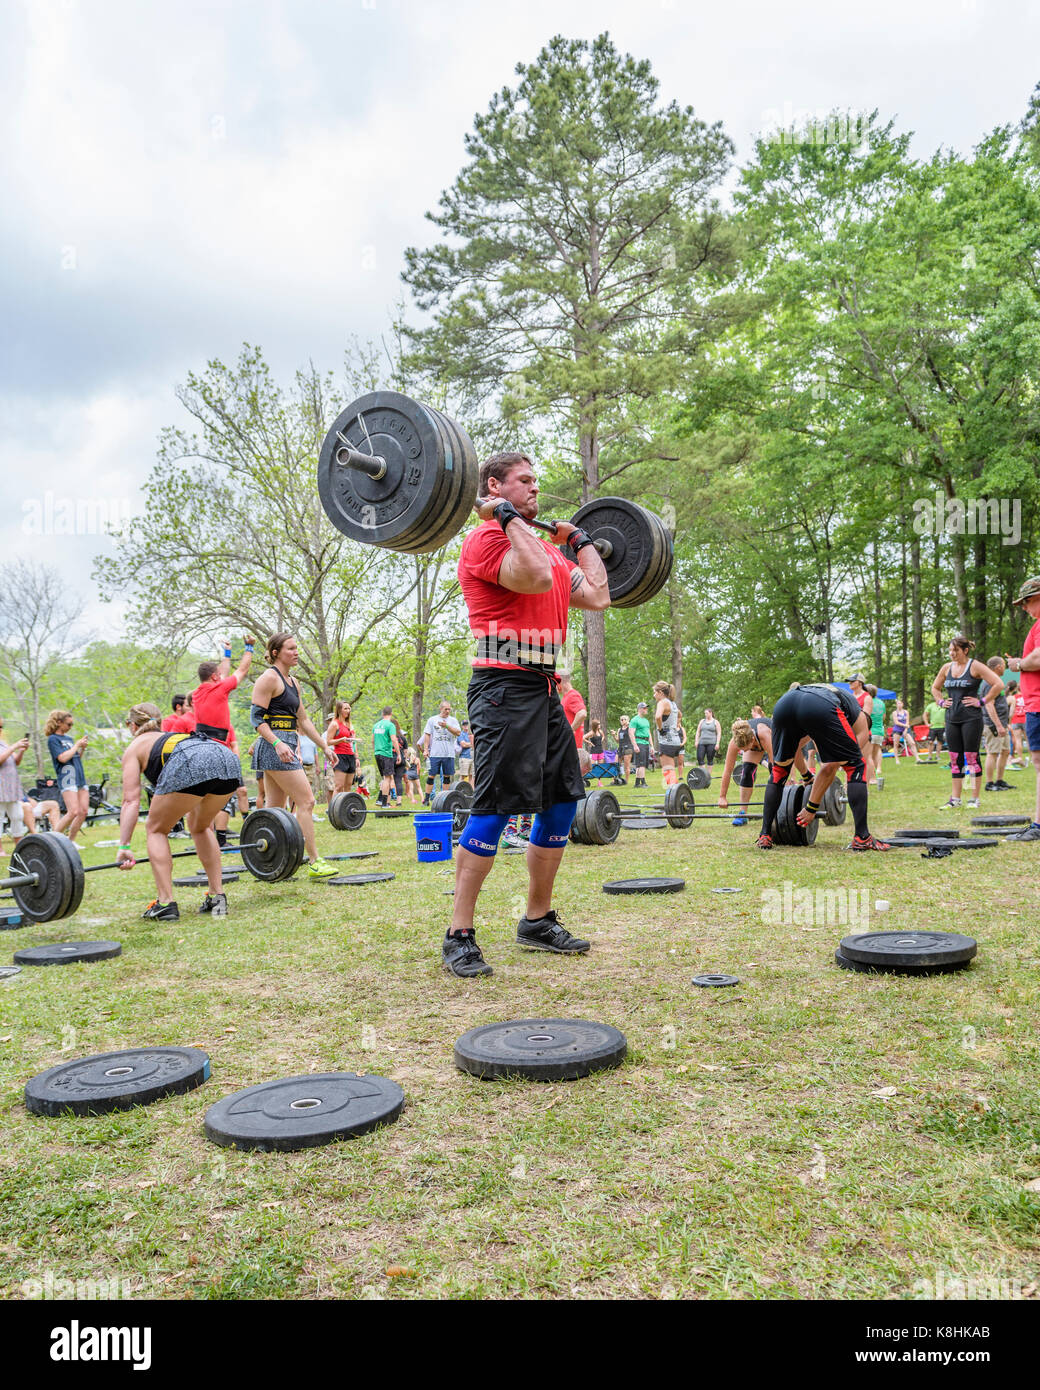 Man lifting weights during the Combat on the Coosa competition which is affiliated with The Garage Games and is similar to CrossFit events. Stock Photo